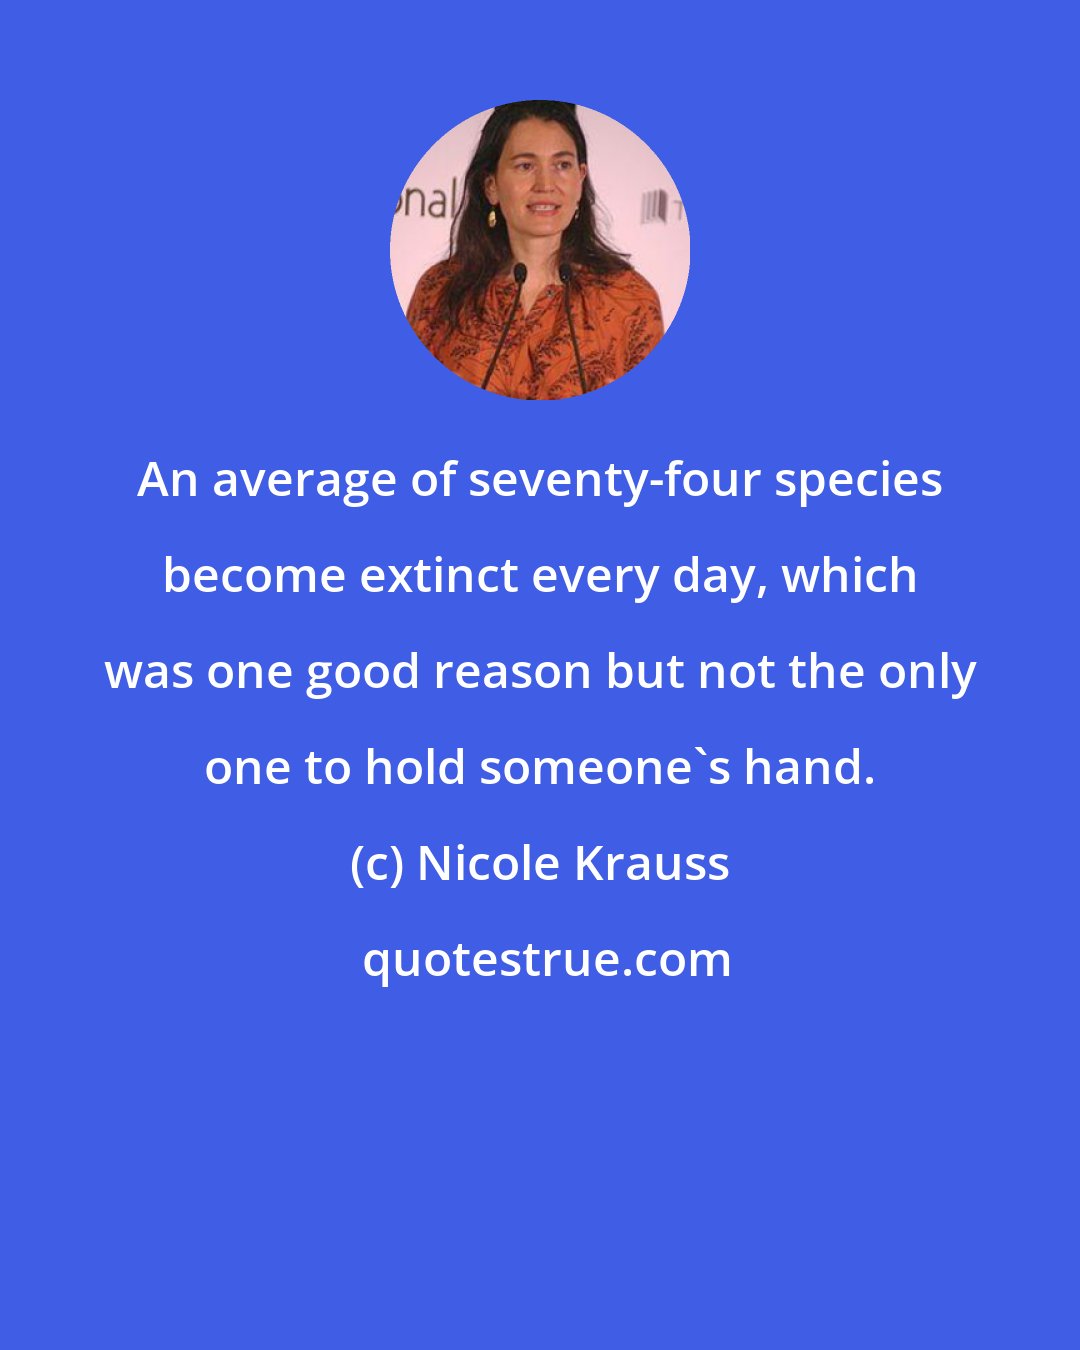 Nicole Krauss: An average of seventy-four species become extinct every day, which was one good reason but not the only one to hold someone's hand.